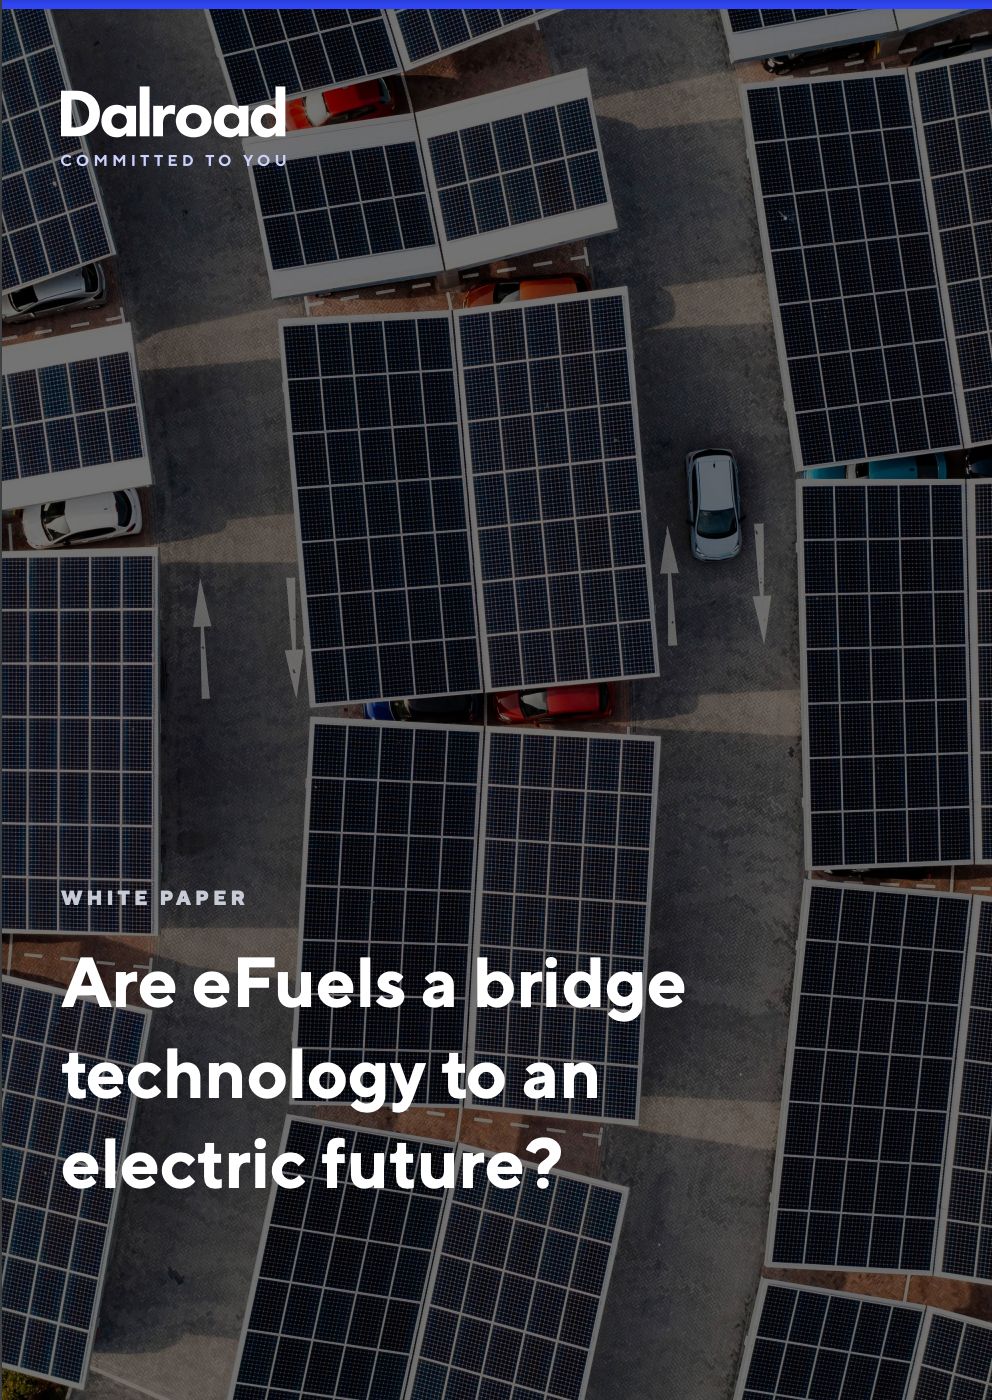 Are eFuels a bridge technology to an electric future?